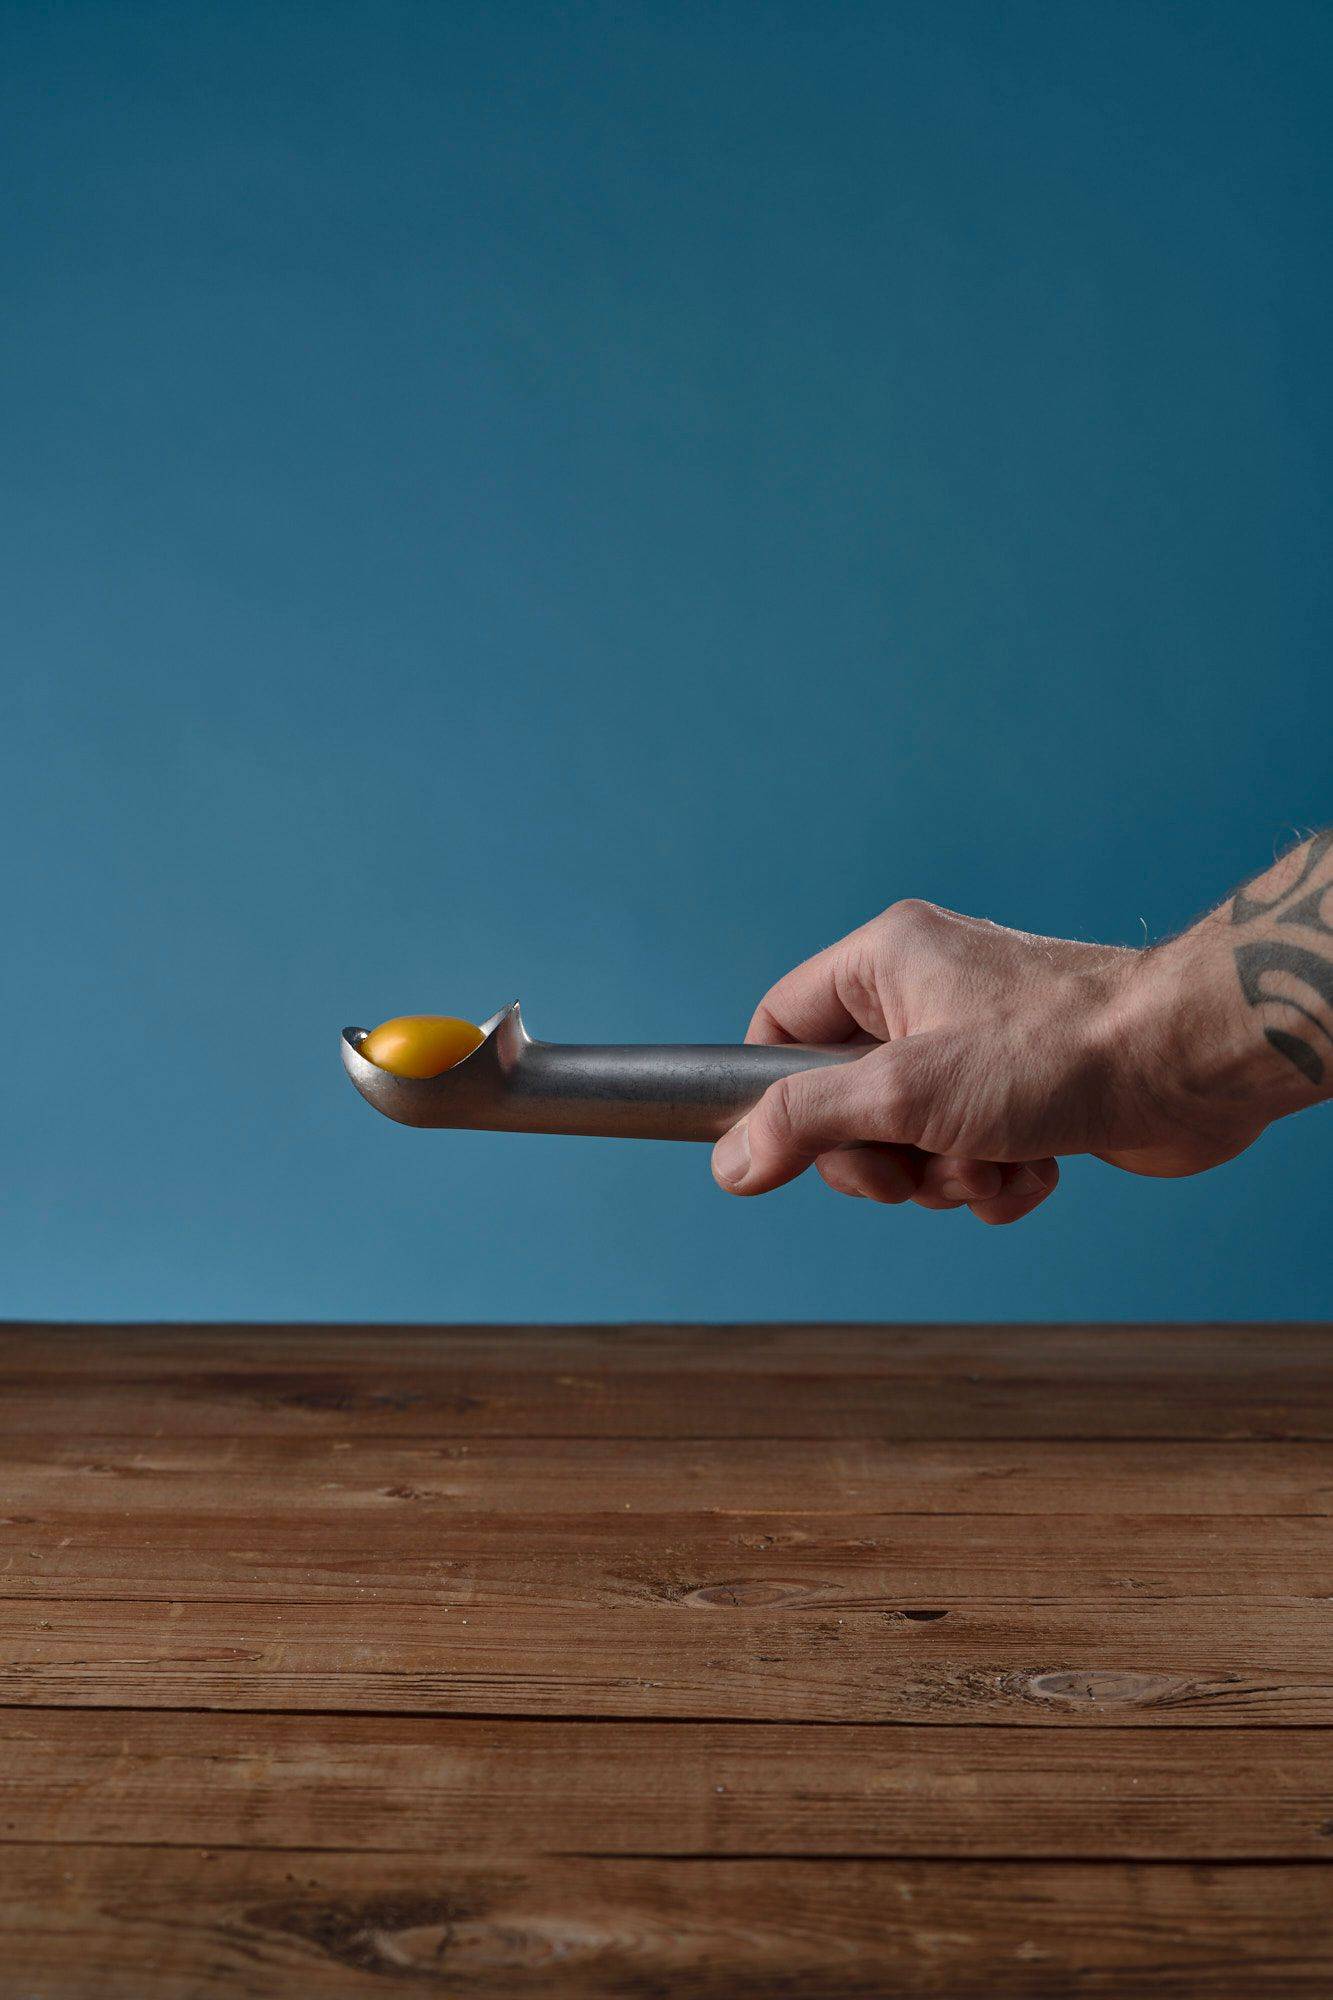 hand holding an ice cream spoon with egg yolk on a wooden table with blue background 